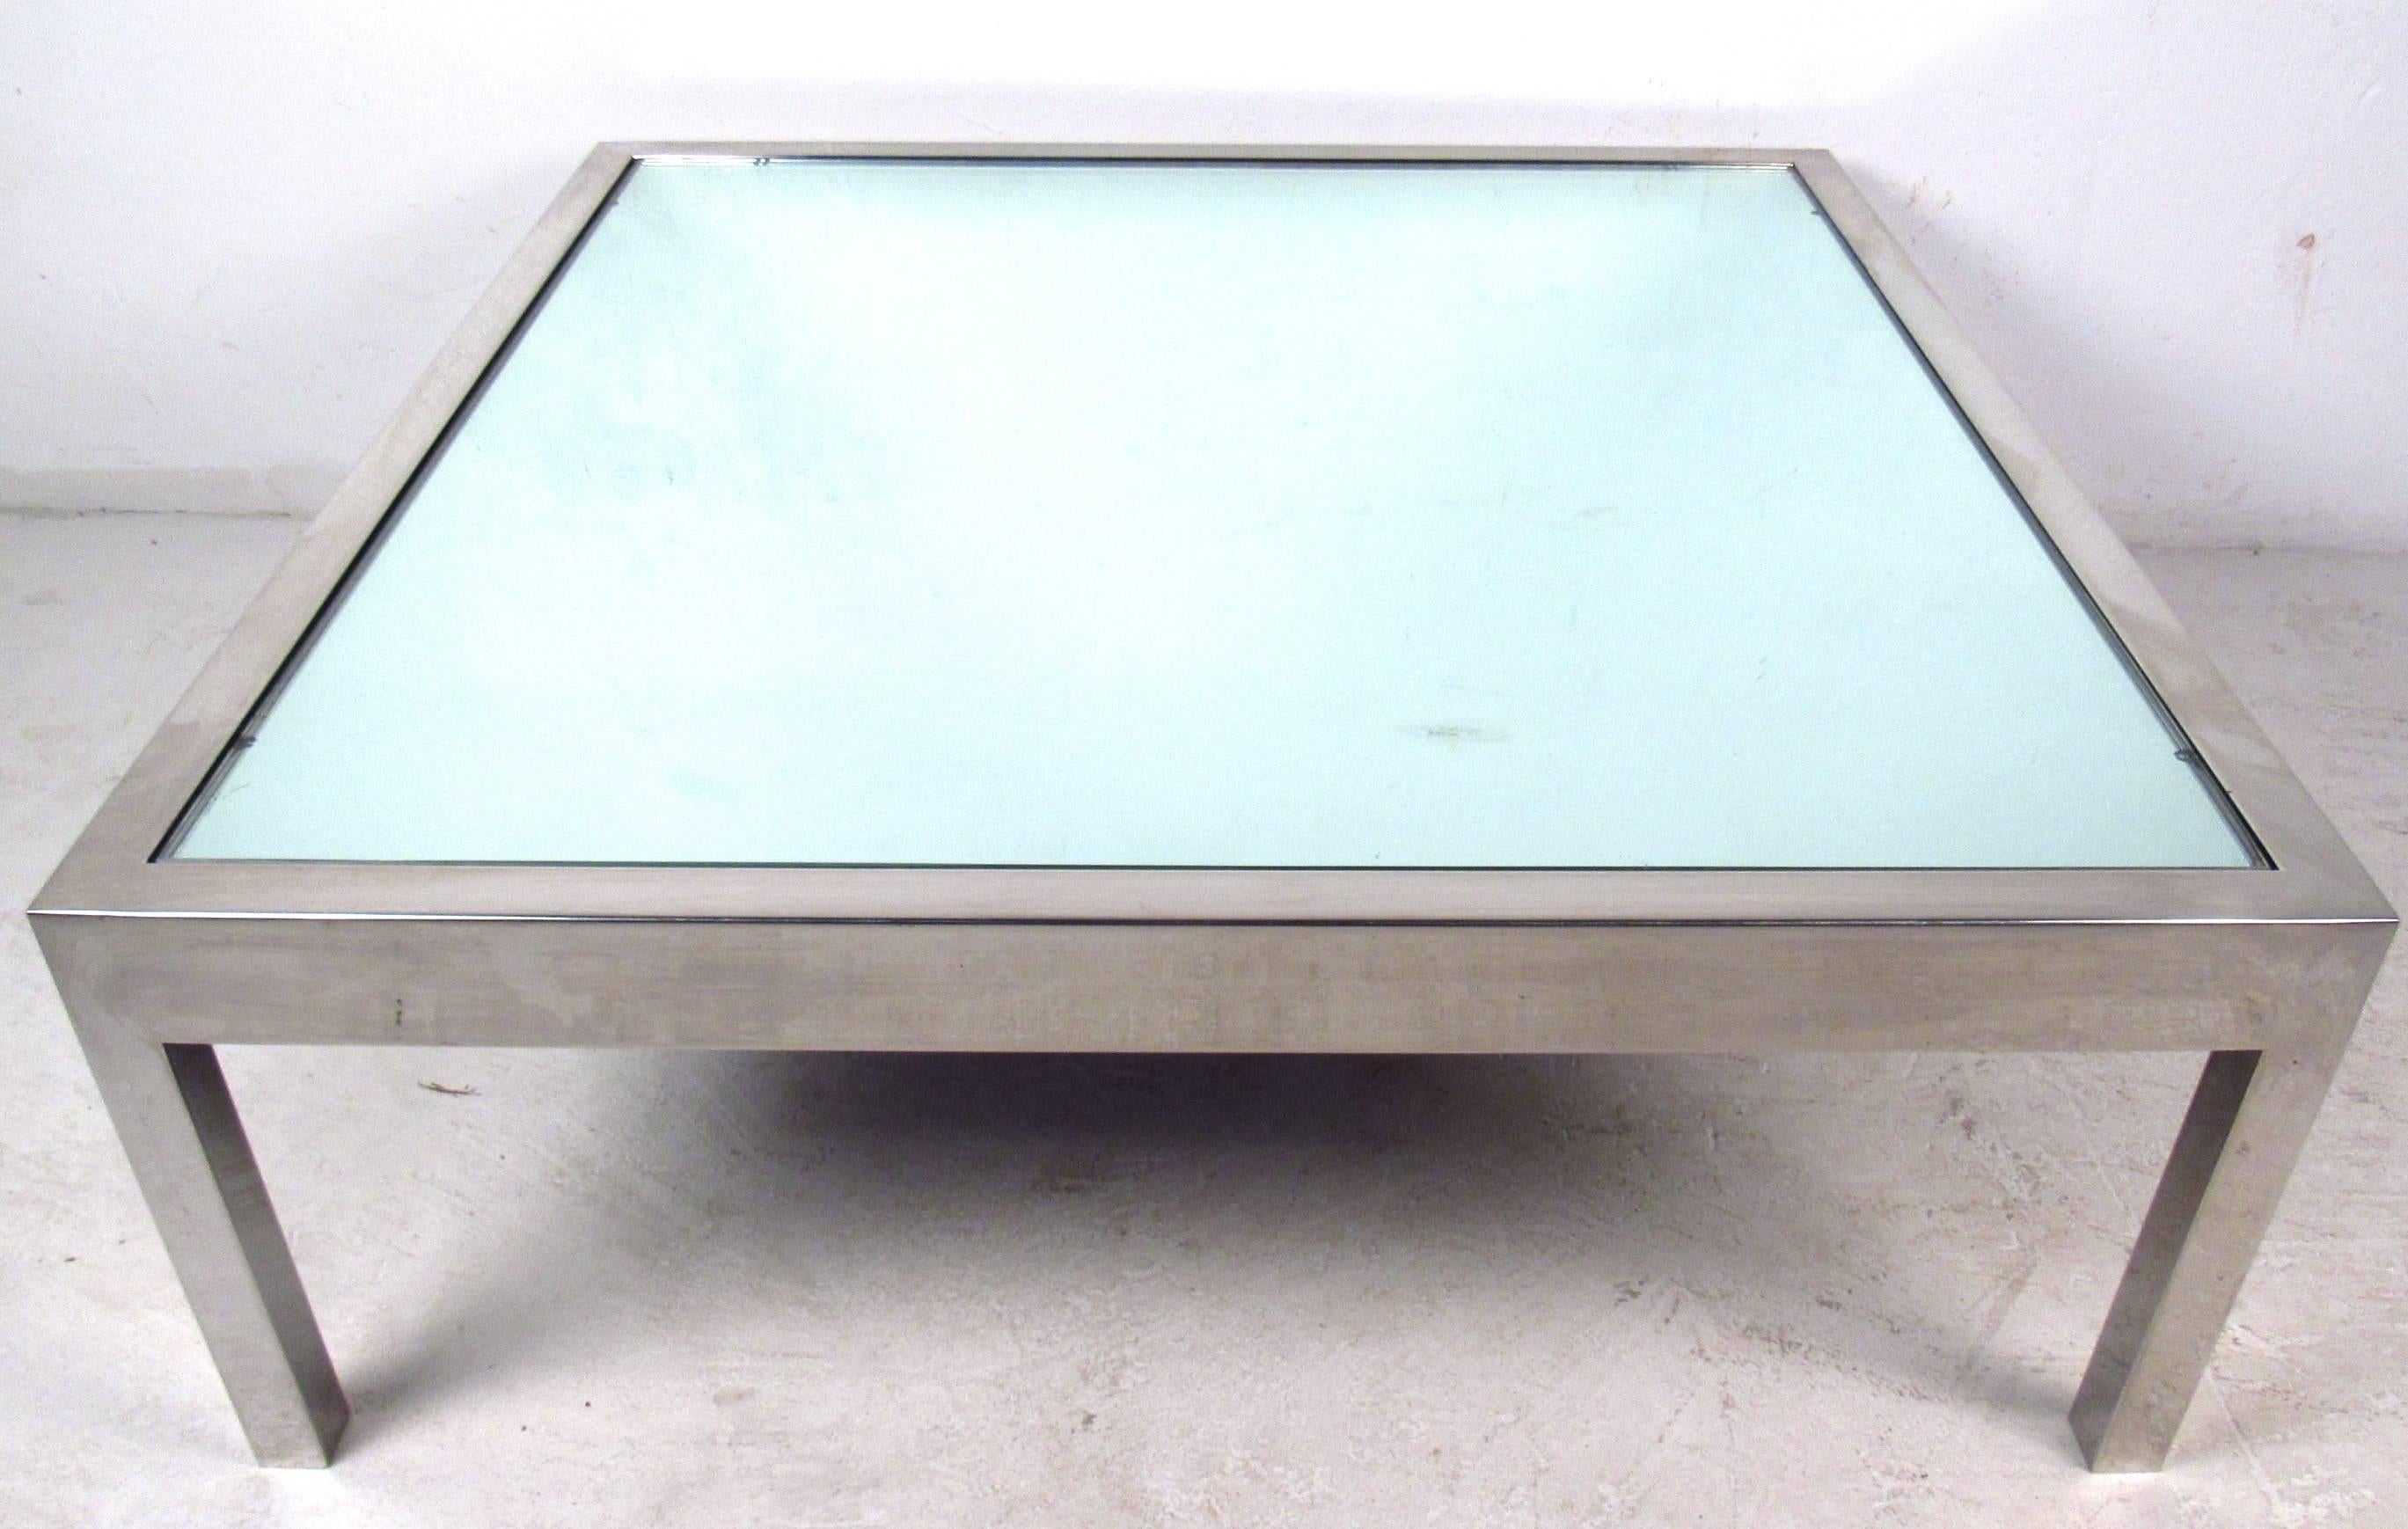 This stylish midcentury chrome cocktail table features a sturdy table base completed with vintage mirrored glass insert. This substantial coffee table makes a wonderful addition to any setting. Please confirm item location (NY or NJ).